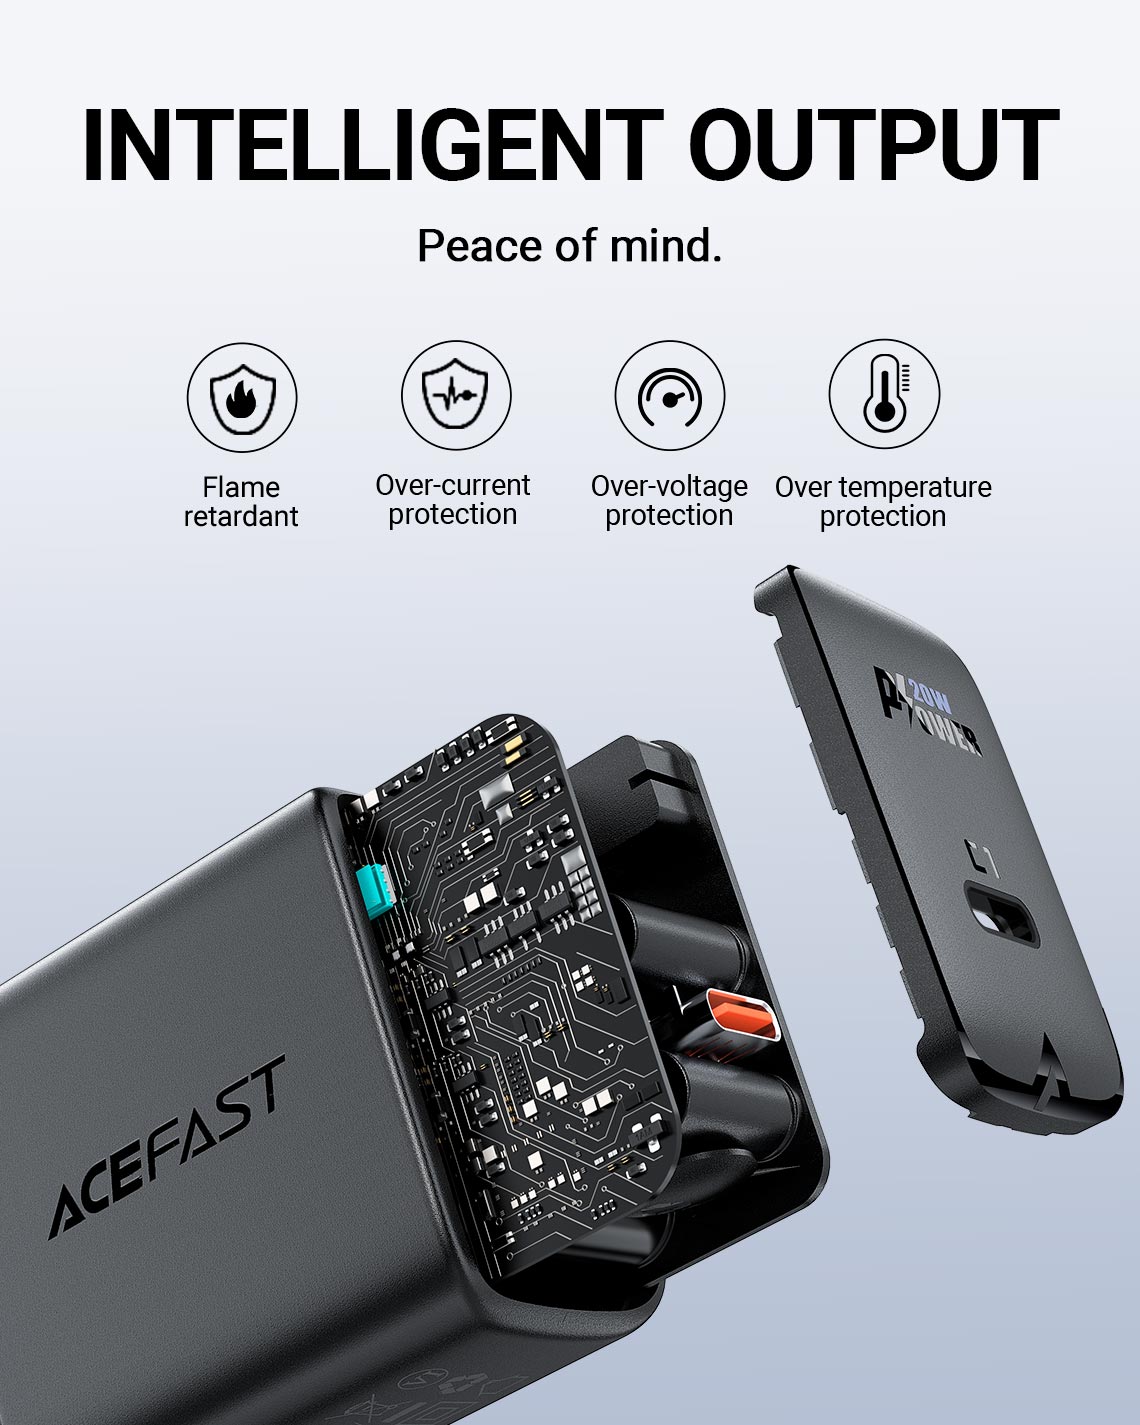 acefast a1 pd20w wall charger intelligent output